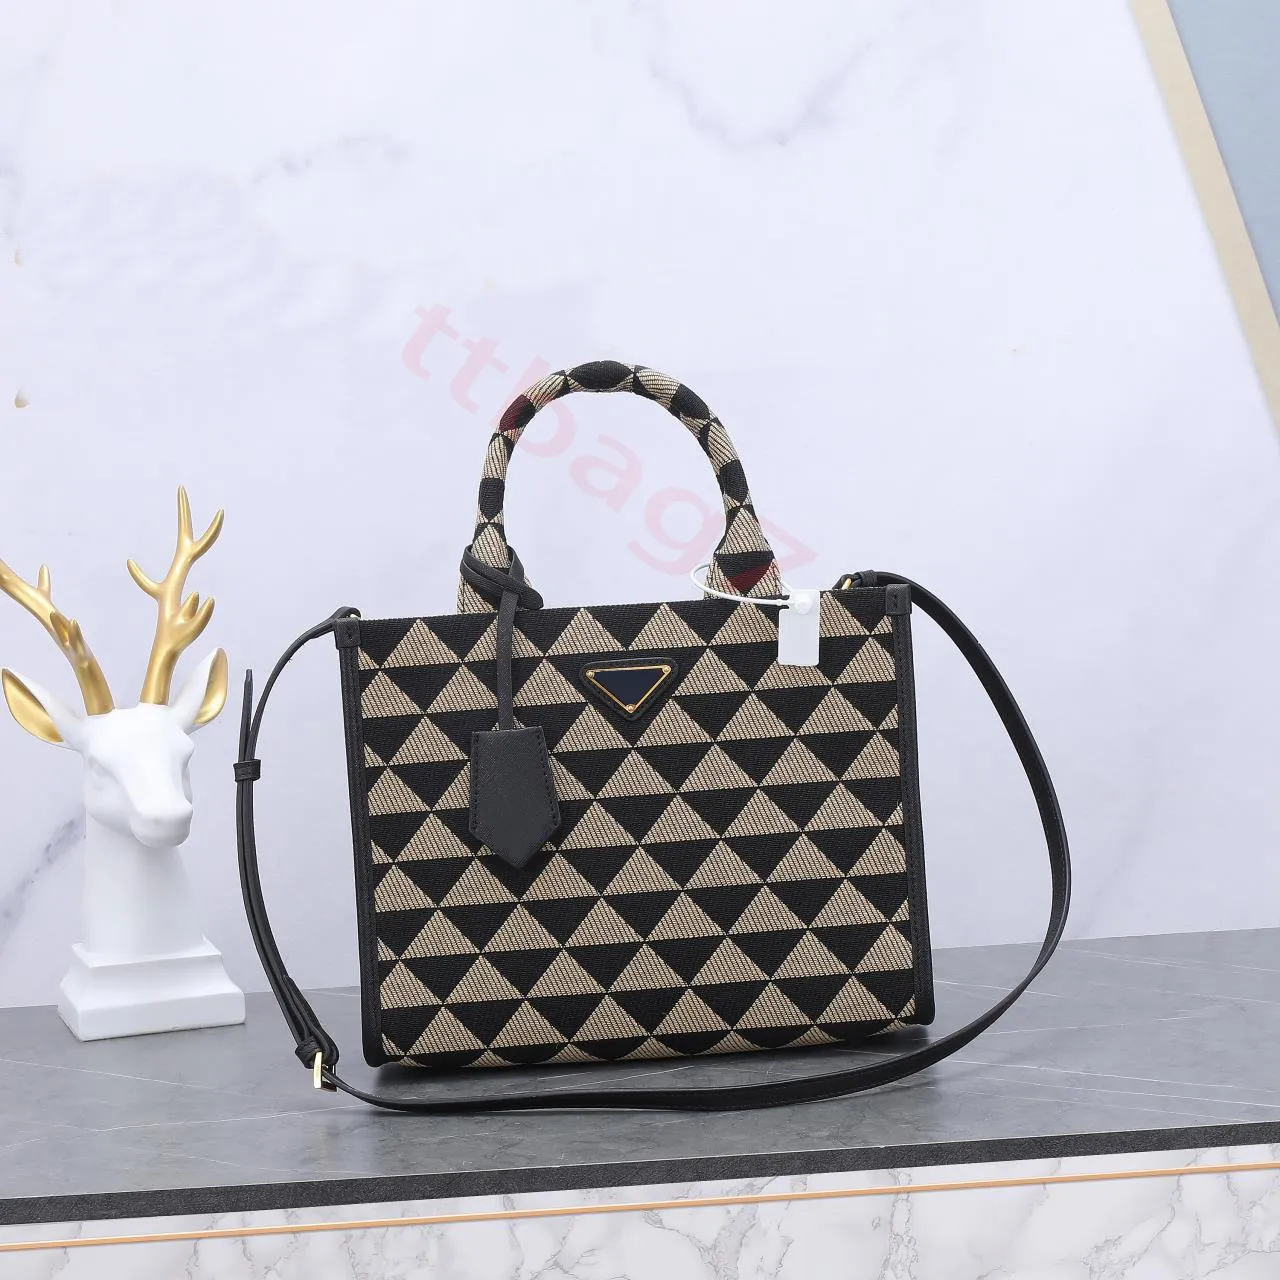 Quality Genuine Leather Embroidered Totes Bag BA356 Bag Luxury Weekend Bag Shopping Designer Reversible Clutch Bag Women Large Capacity Pattern Fashion Bag Tote